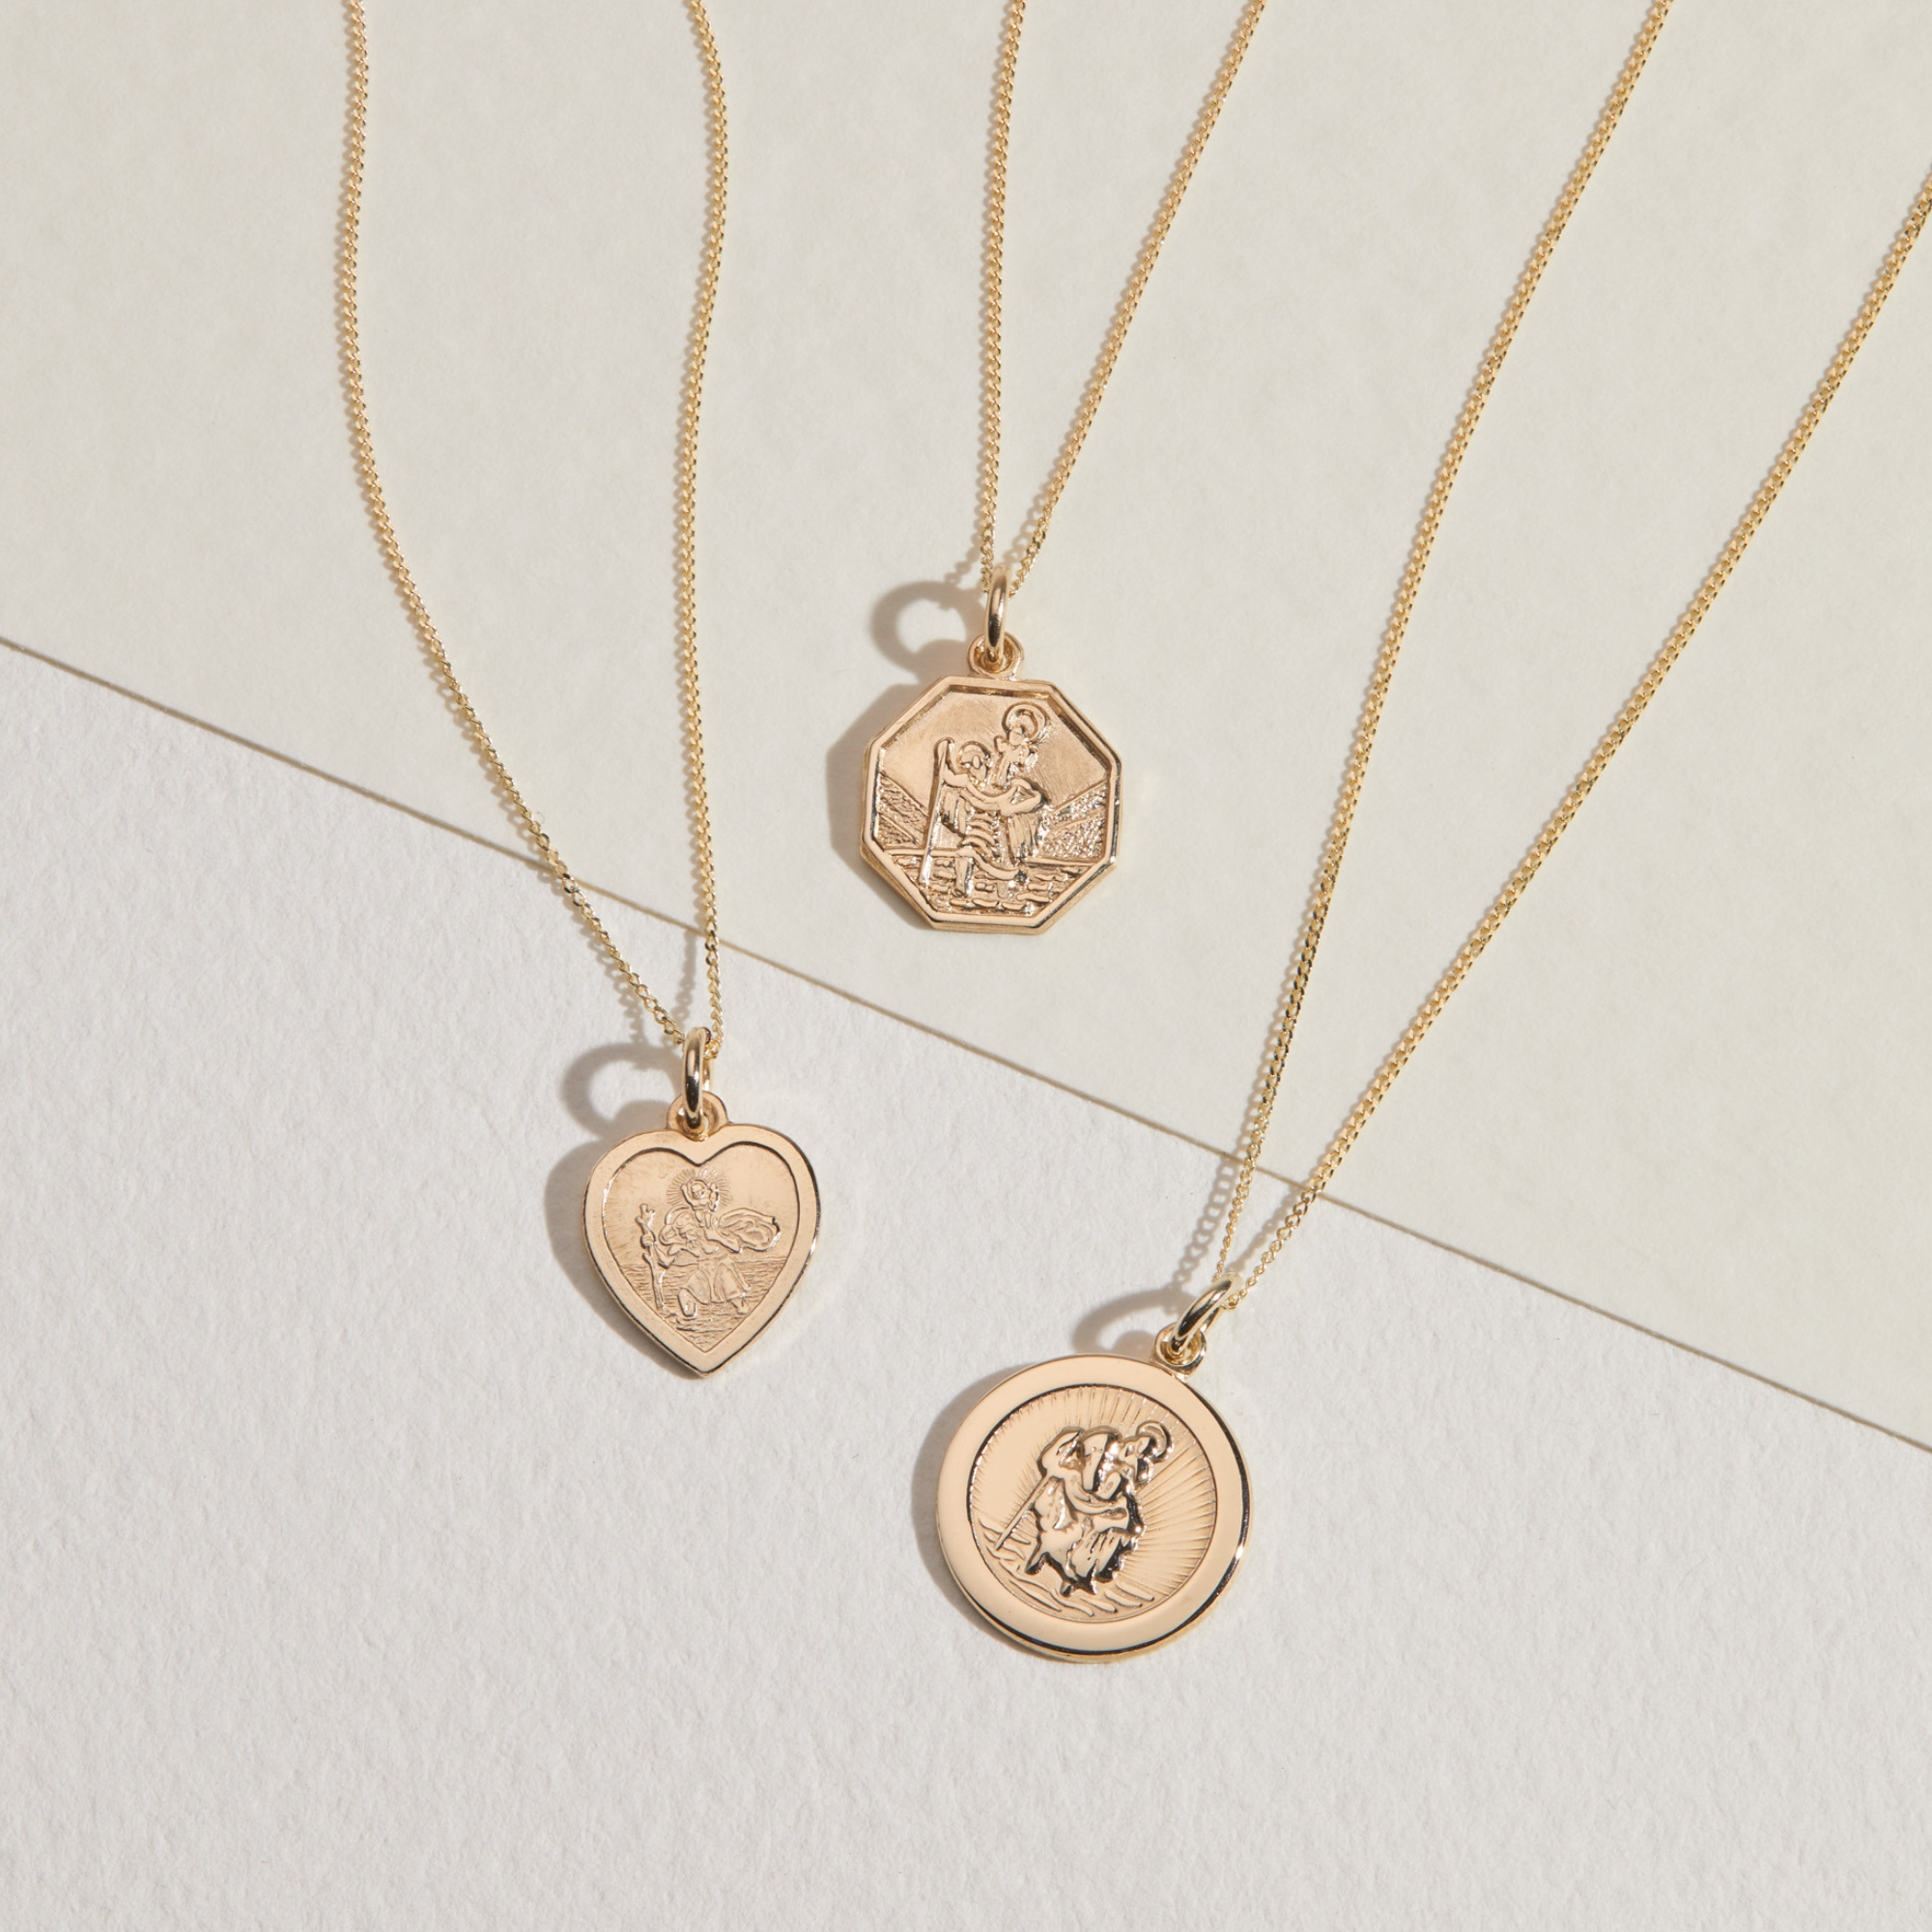 Gold small heart st christopher necklace, alongside a small circle st christopher necklace and a small octagonal st christopher necklace